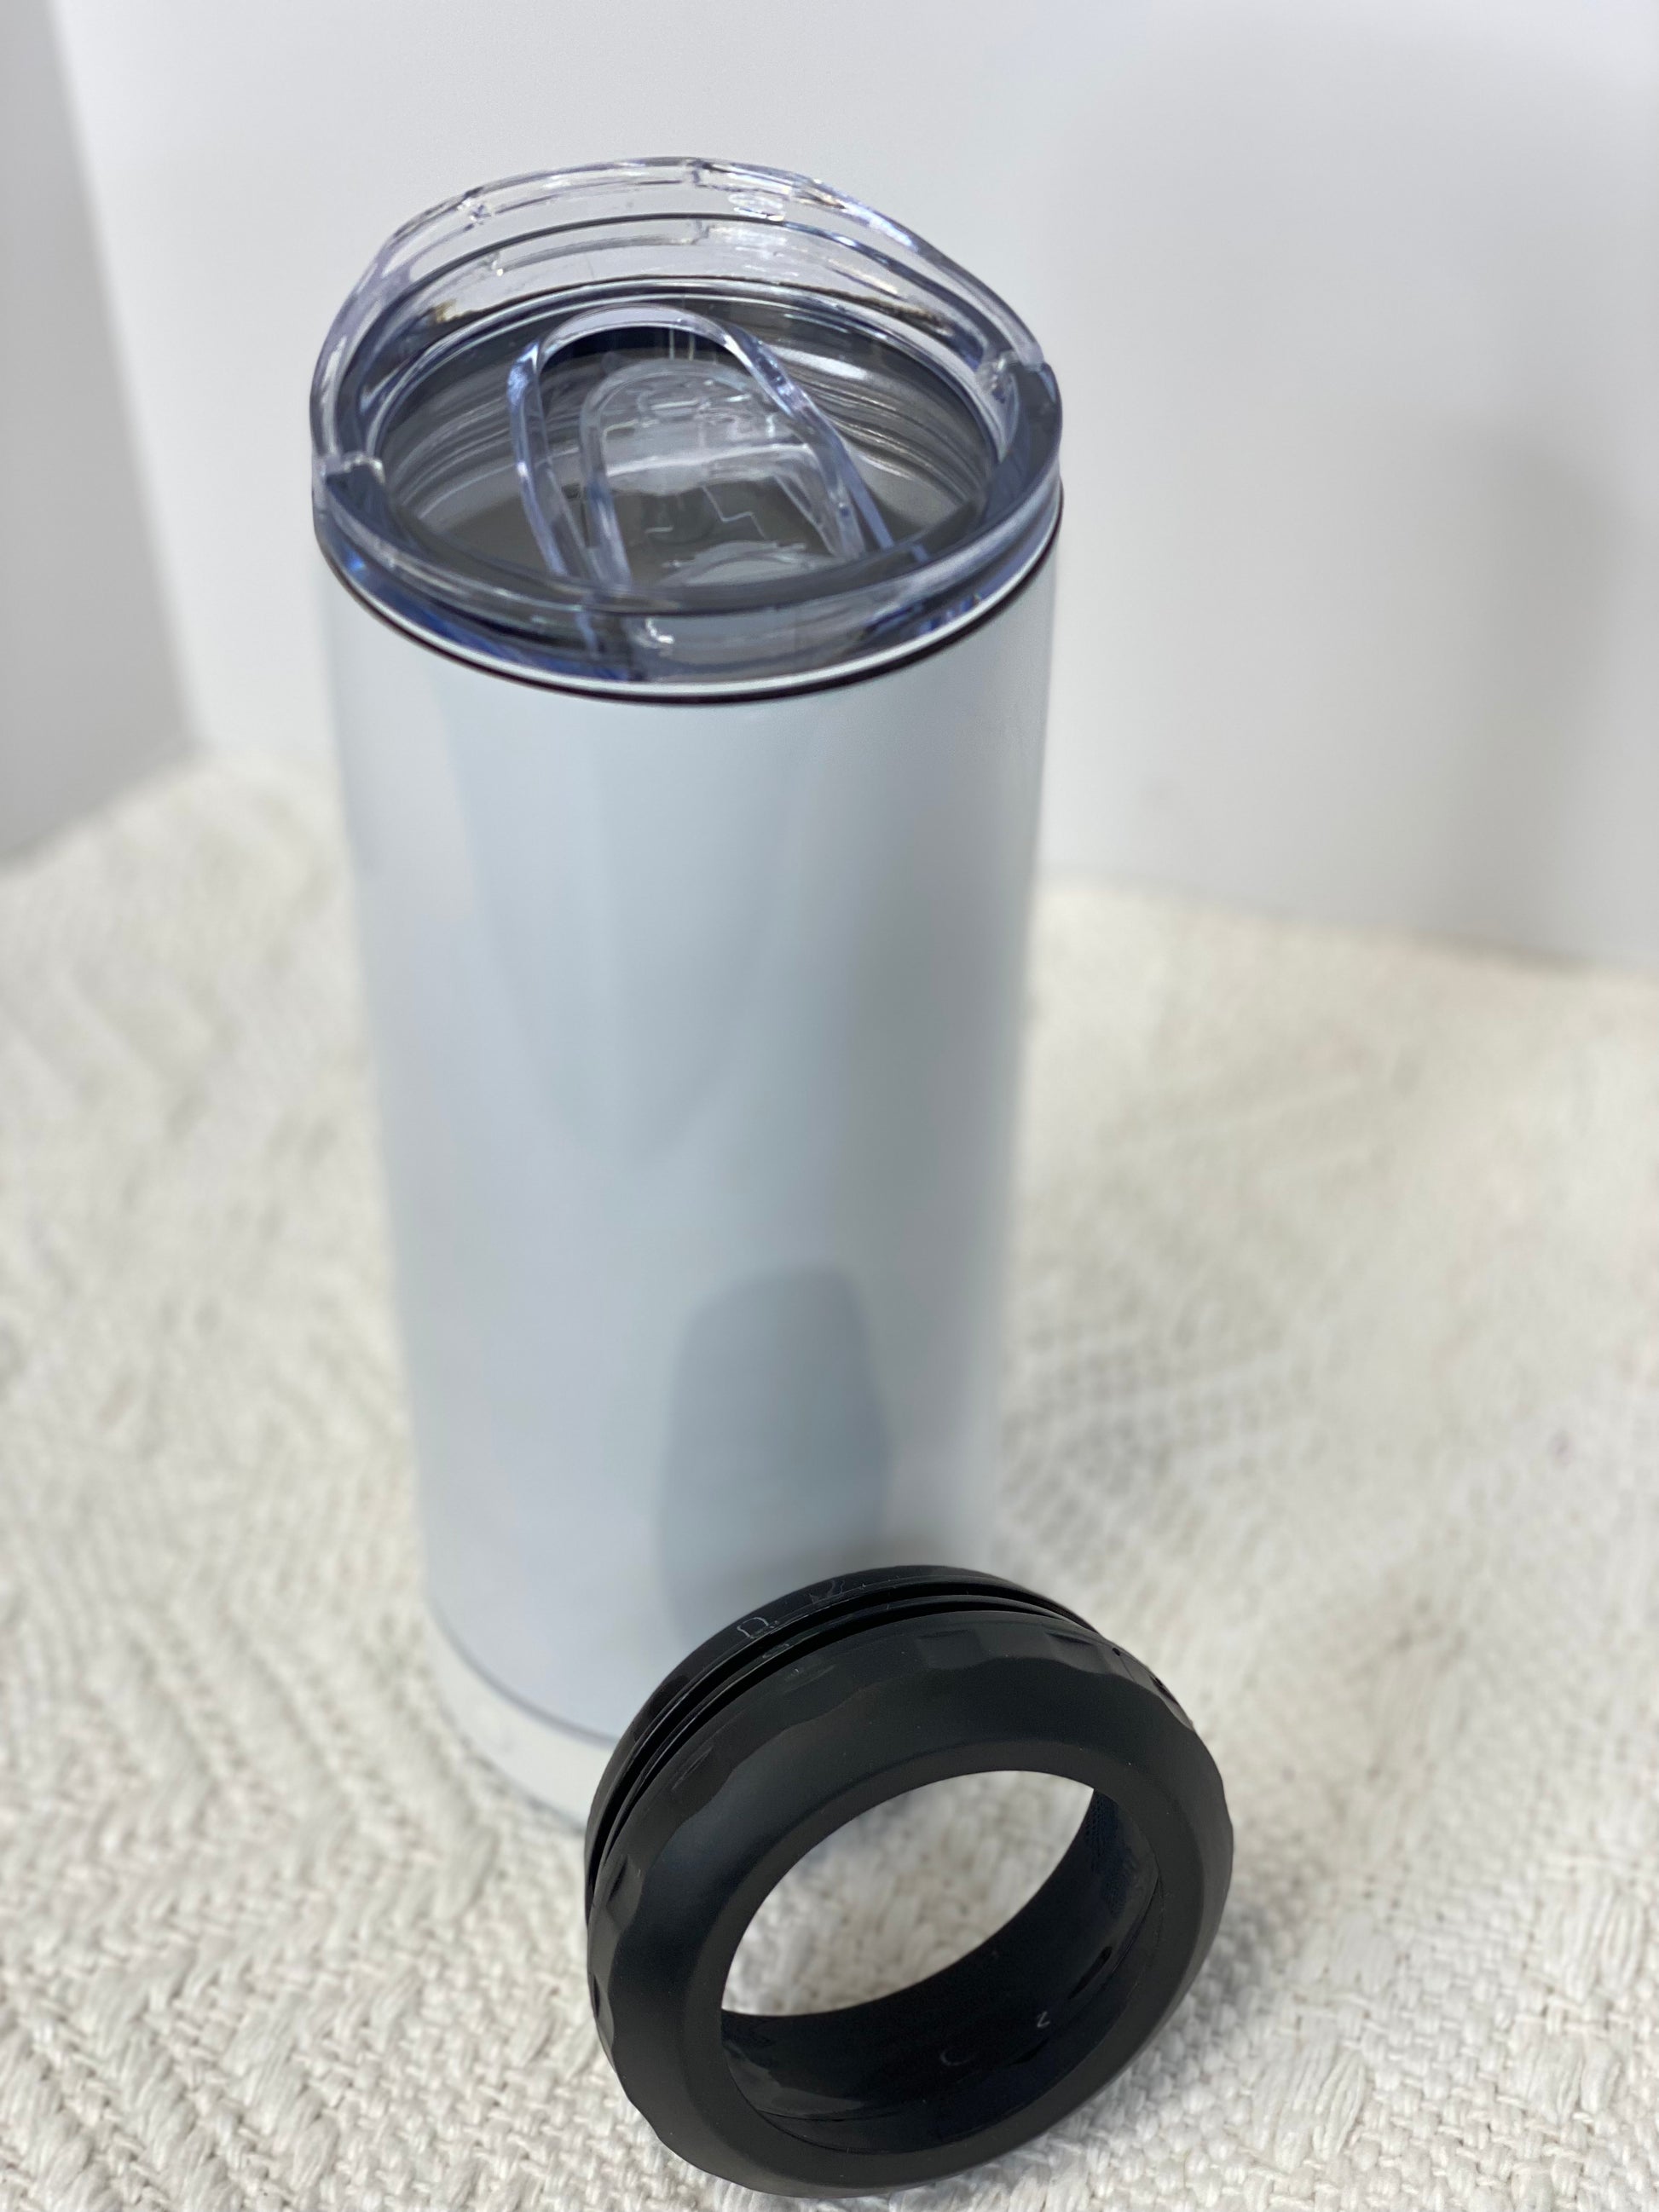 BLANK 4 in 1 Insulated Can Cooler